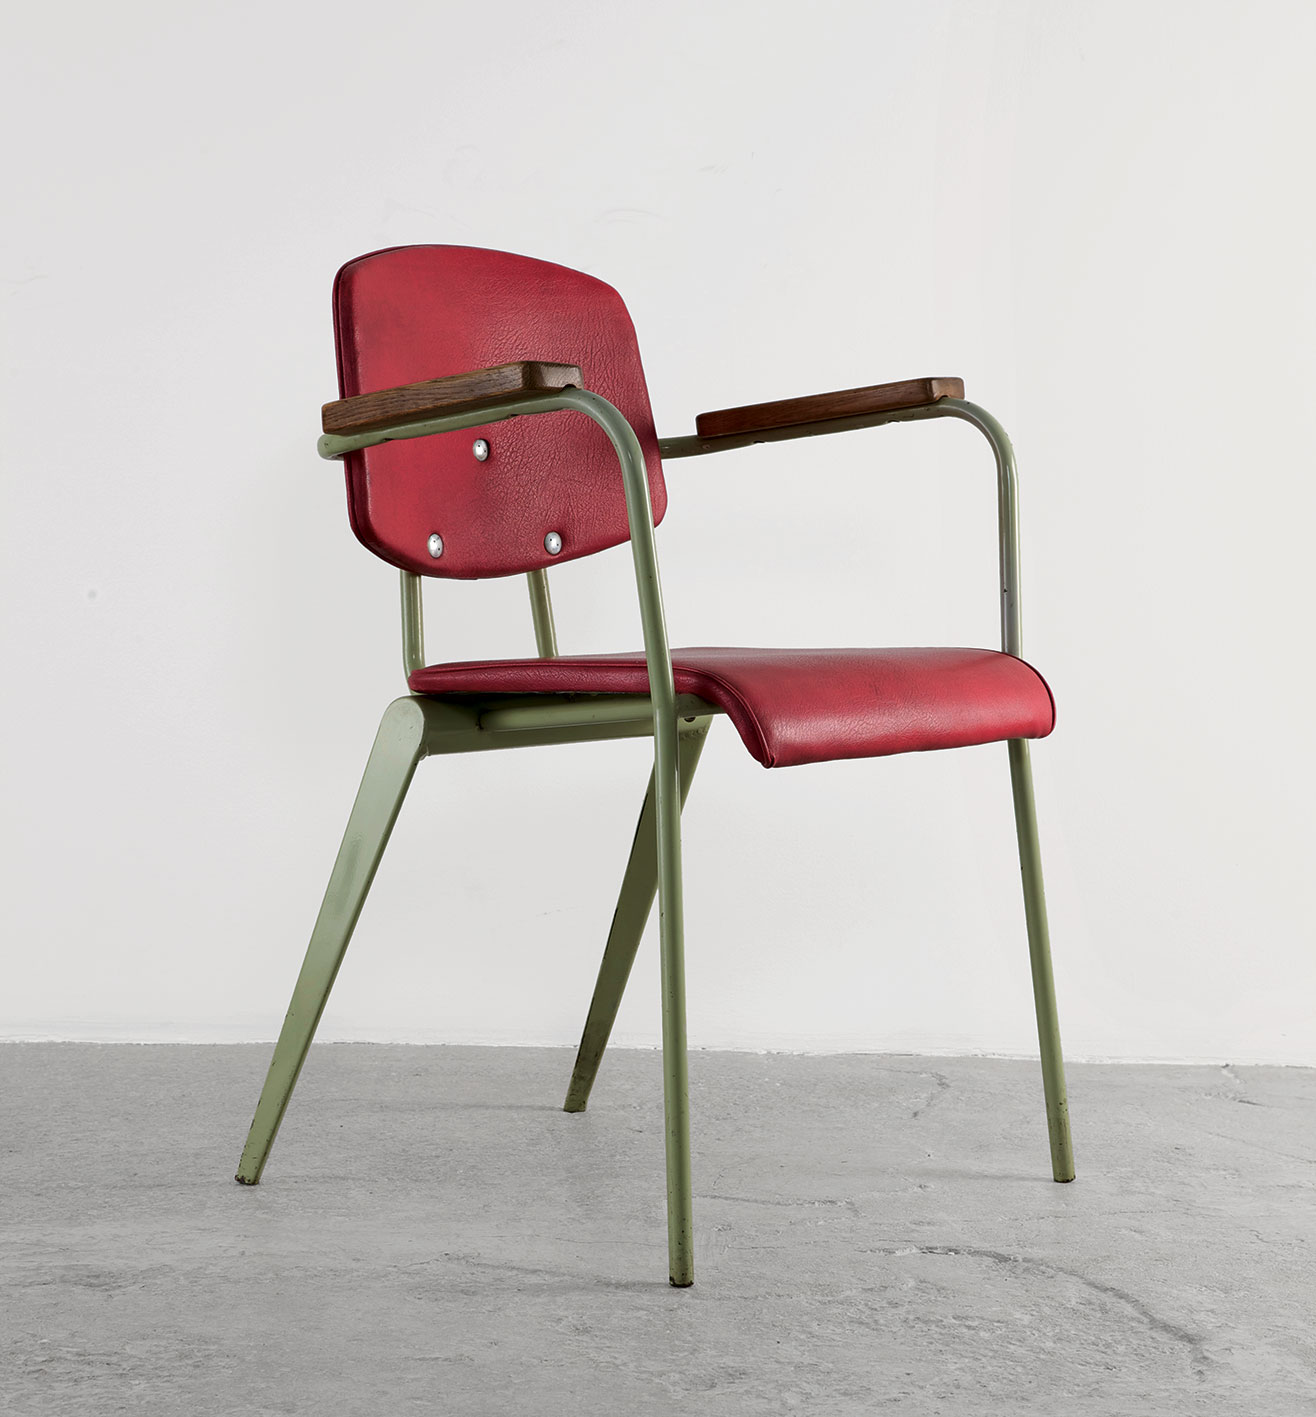 Conférence no 355 chair, 1954.